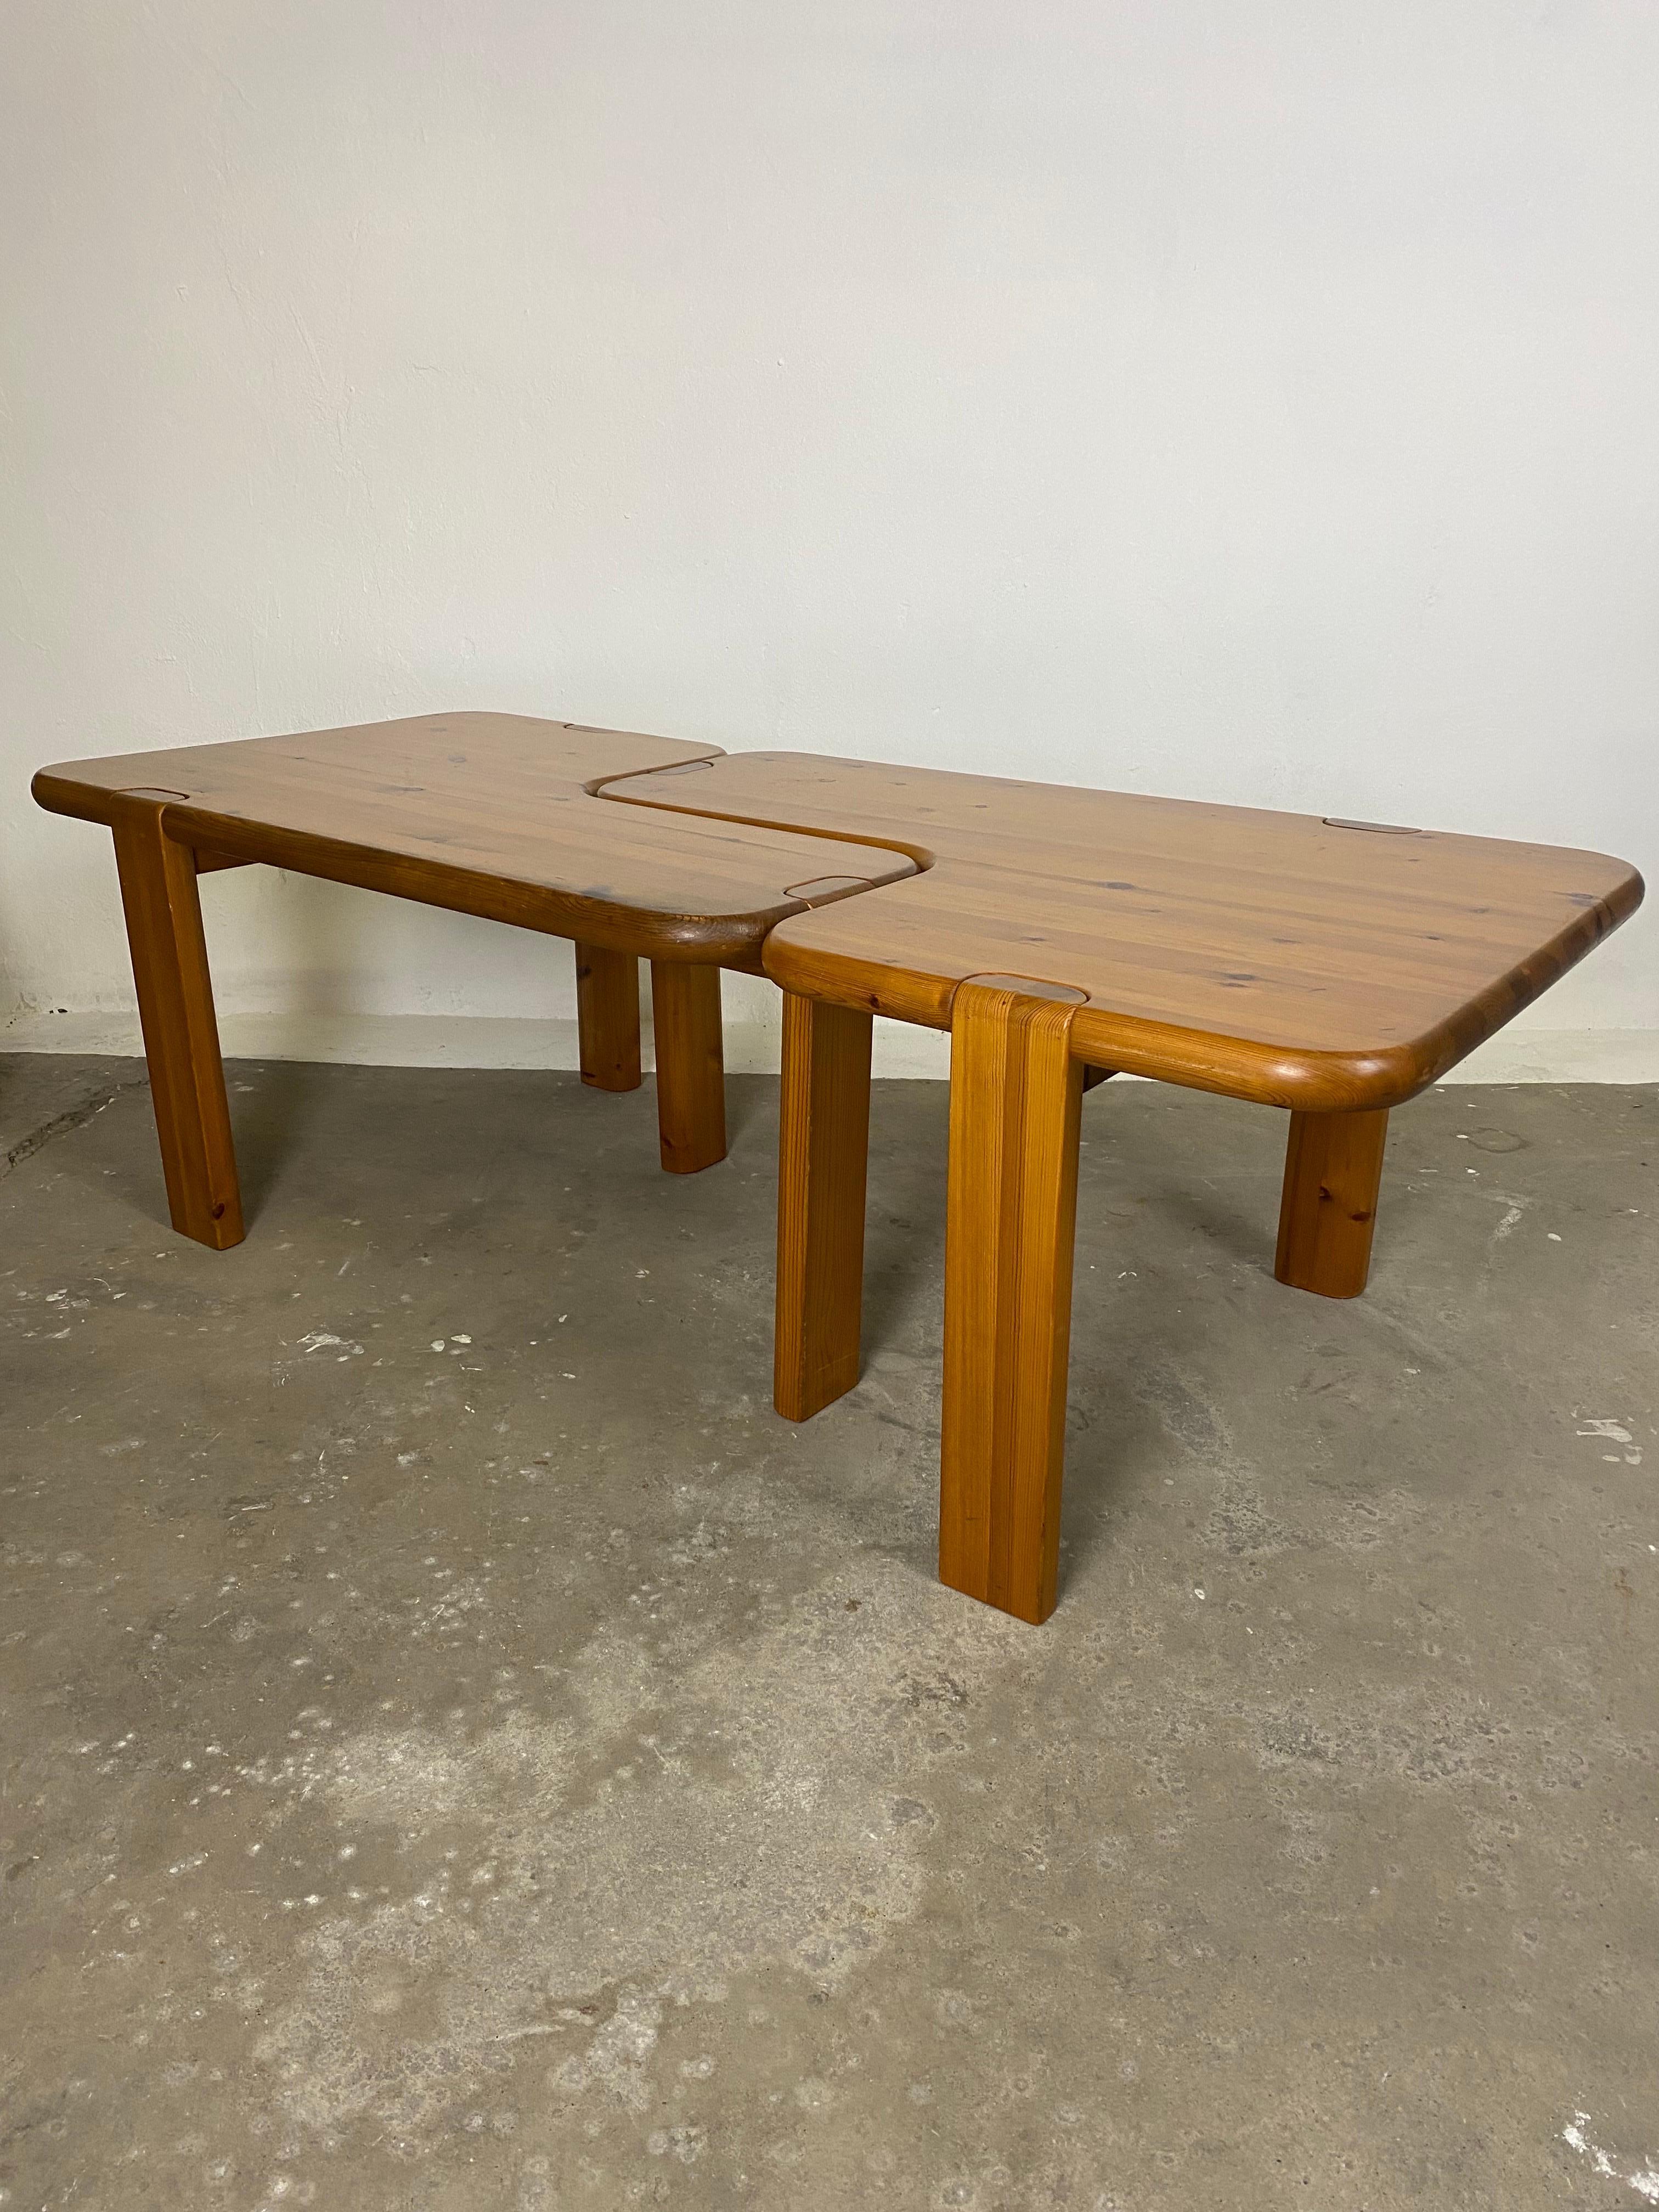 Pine Set of 2 Midcentury Coffeetables by Aksel Kjersgaard for Odder Furniture 1970s For Sale